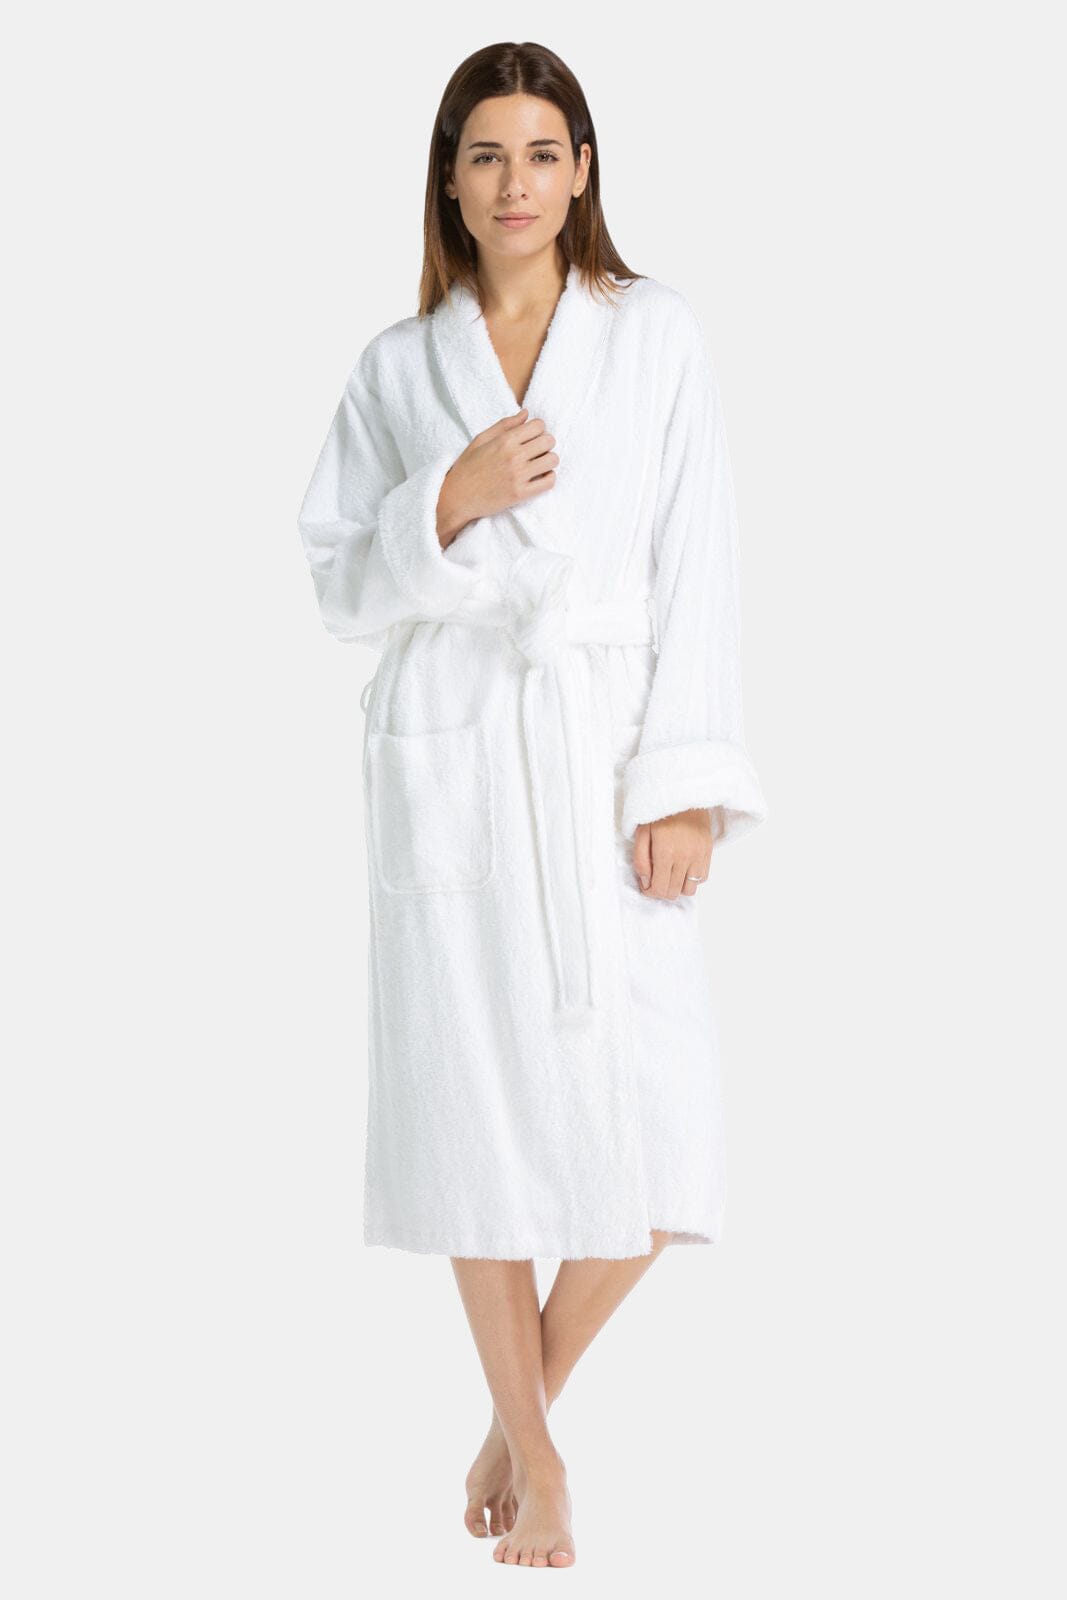 Fishers Finery Women's Terry Cloth Spa Package: Body Wrap & 2 Hair Towels  (White)